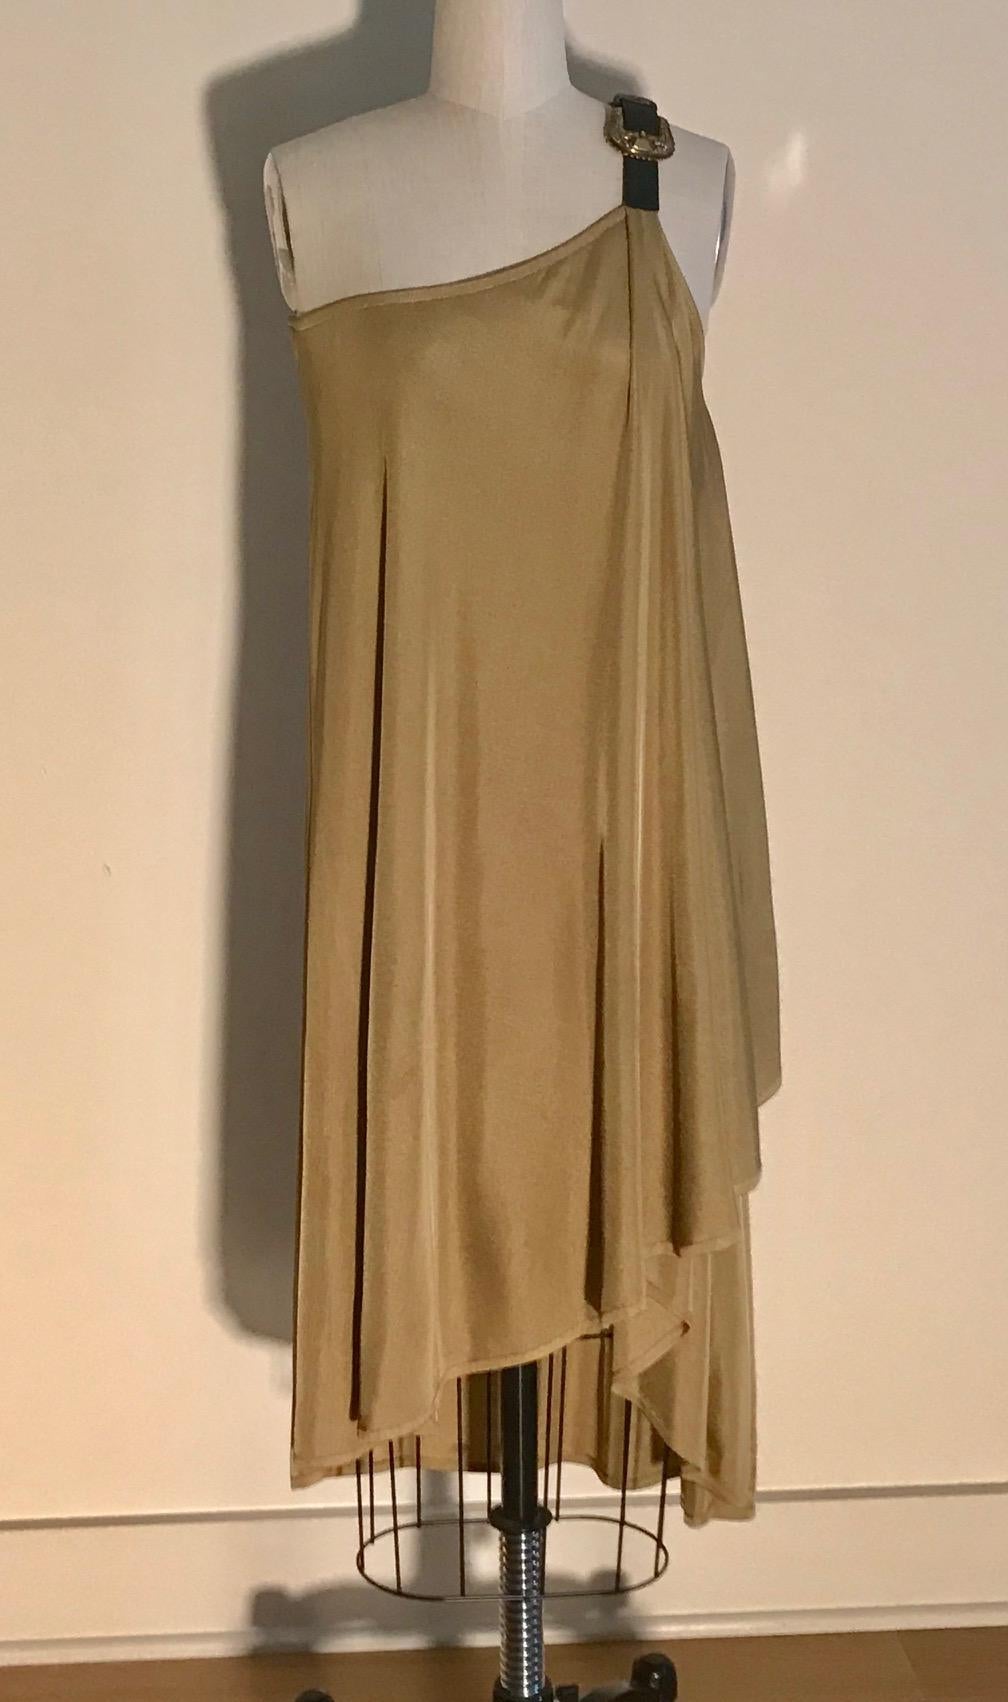 Alexander McQueen 2000s tan knit dress with leather strap at asymmetrical top and engraved gold buckle accent.

100% viscose, 100% leather strap.

Made in Italy.

Size Small.
Bust 30.
Waist open.
Hip open.
Length (top of strap to longest point of